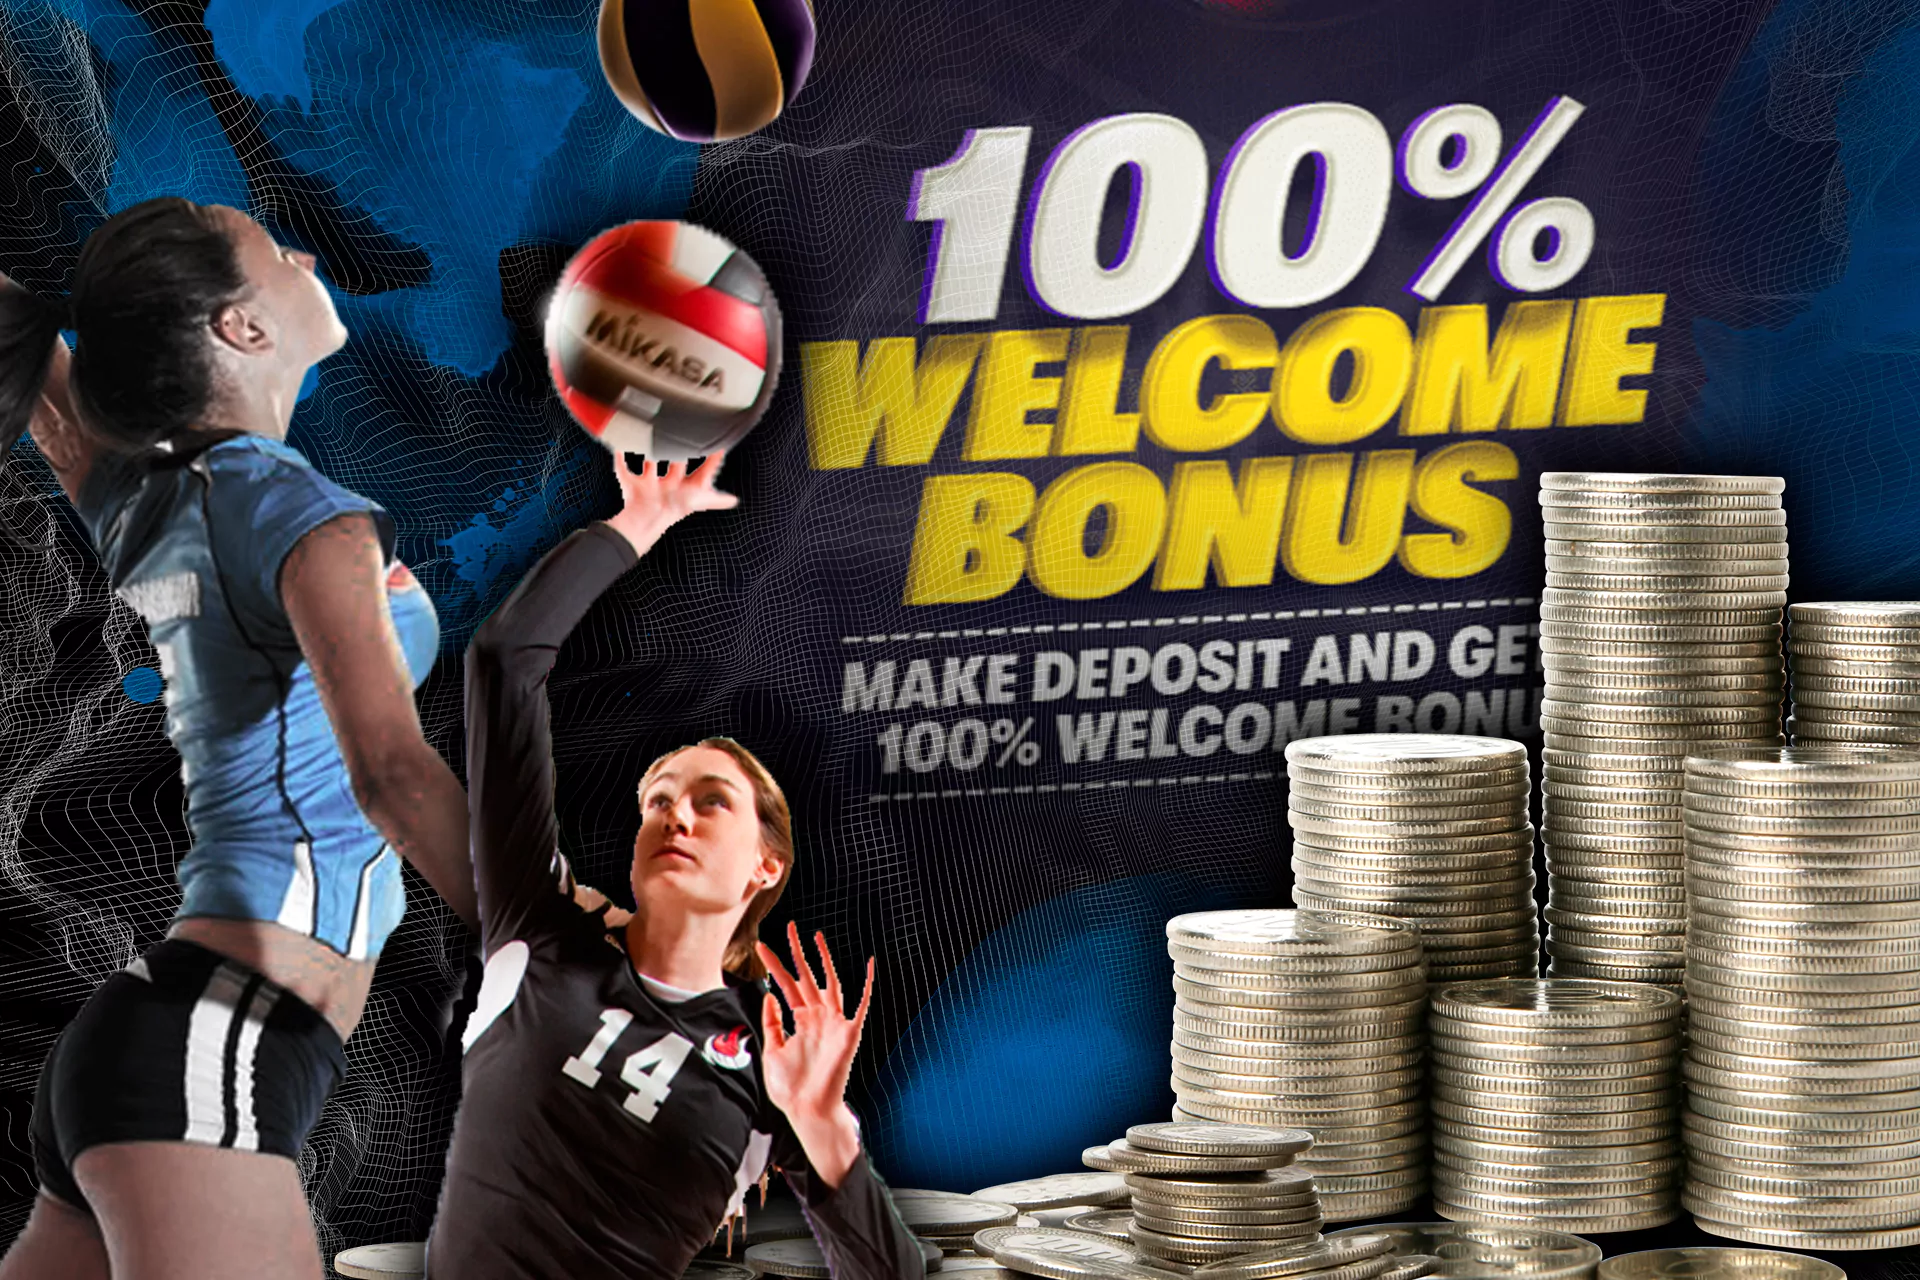 All the information about how the velcom bonus works in volleyball betting.